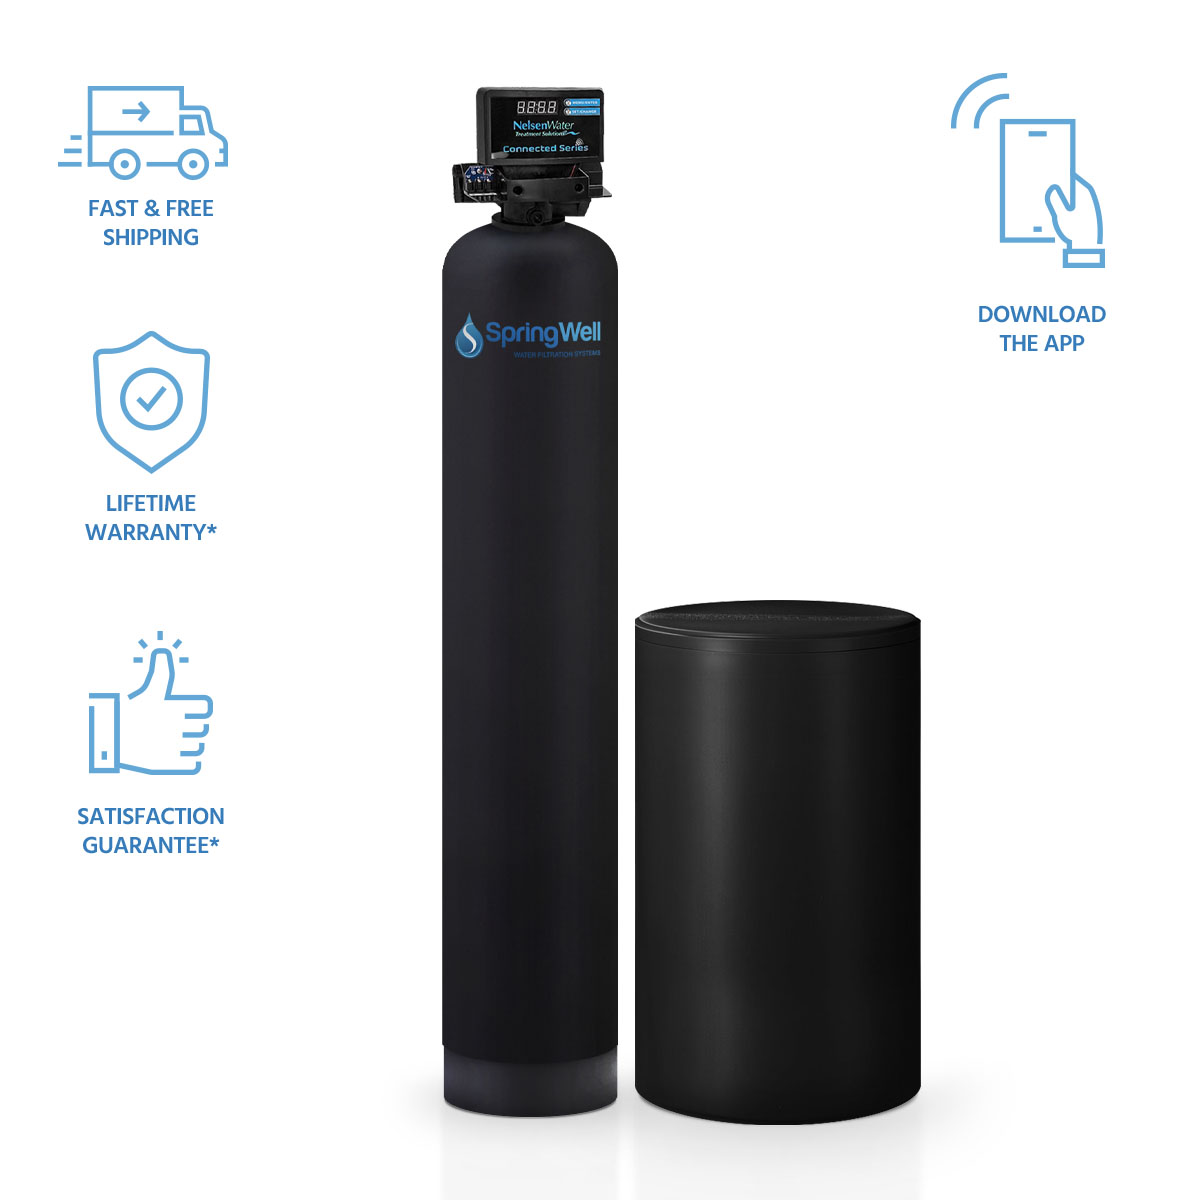 Portable Water Softener - A MUST HAVE FOR ALL - Page 4 - iRV2 Forums